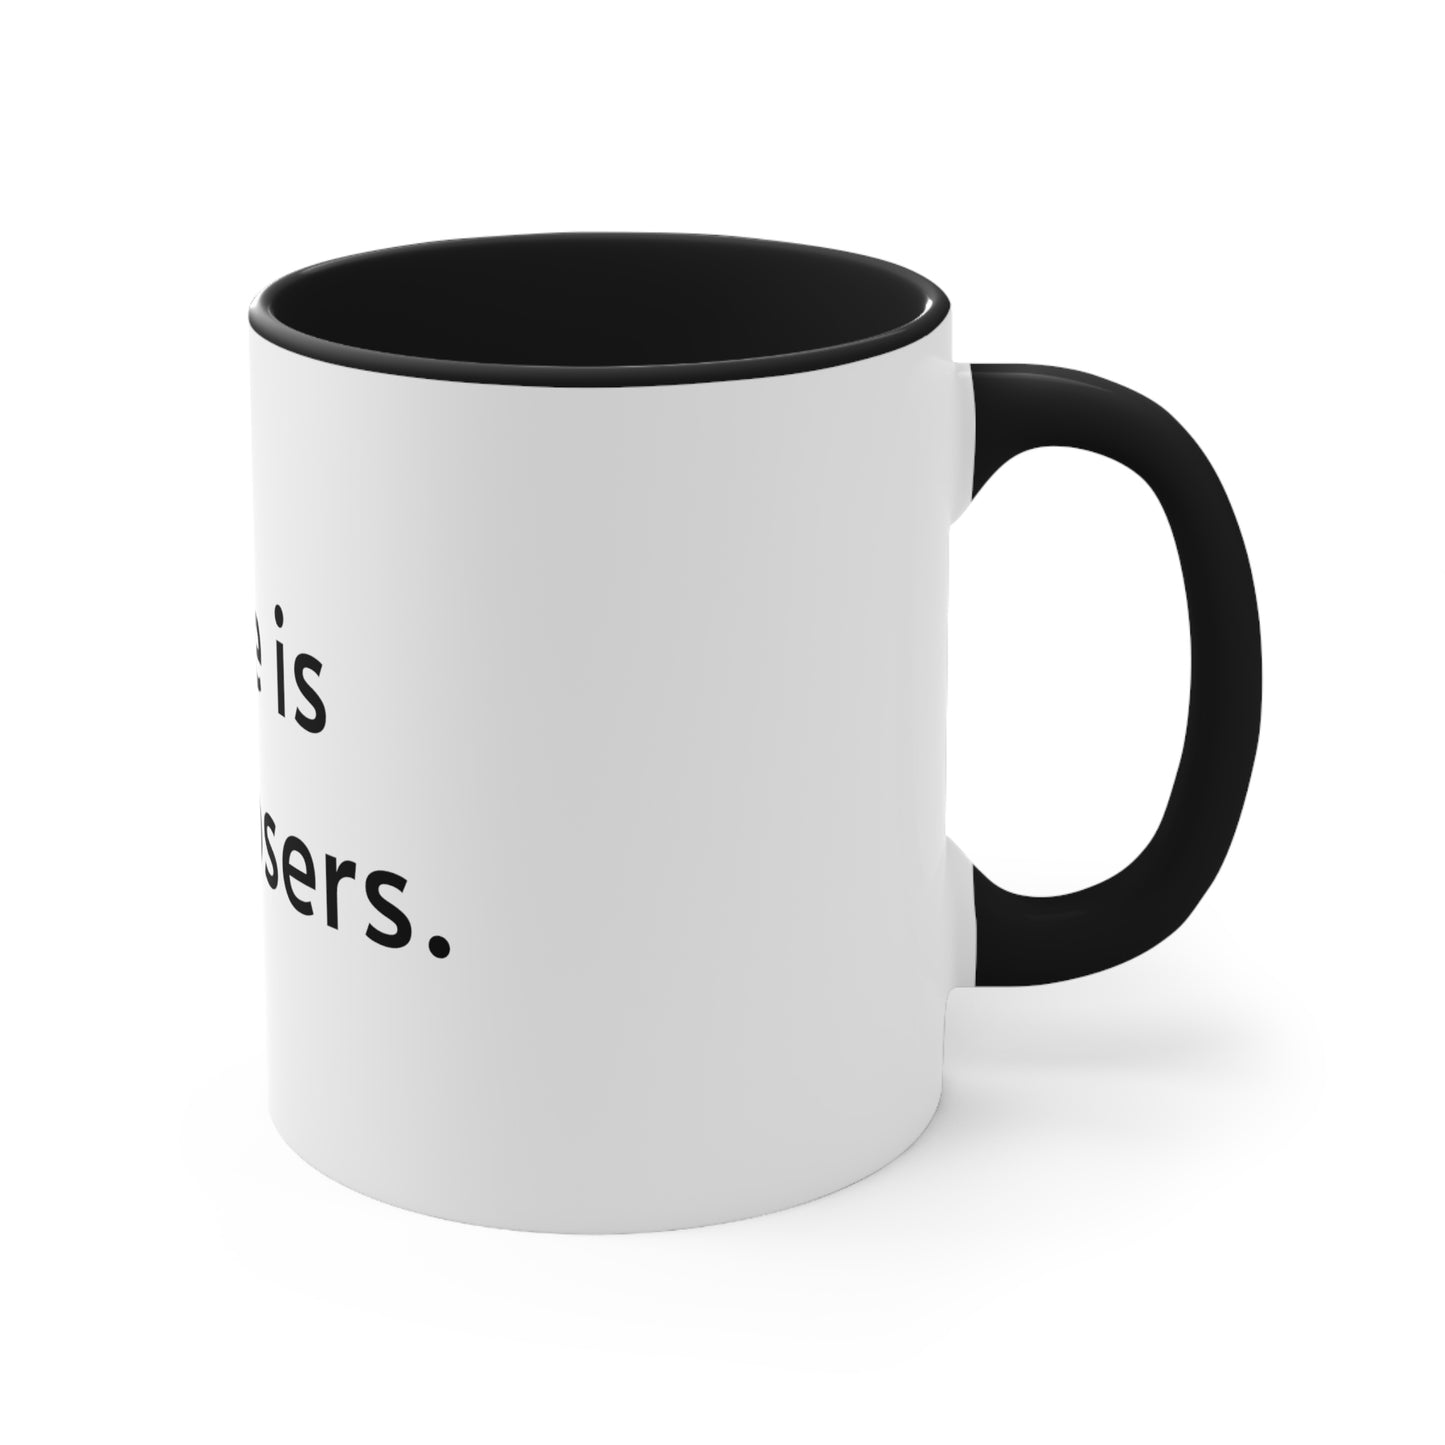 Coffee is for closers.